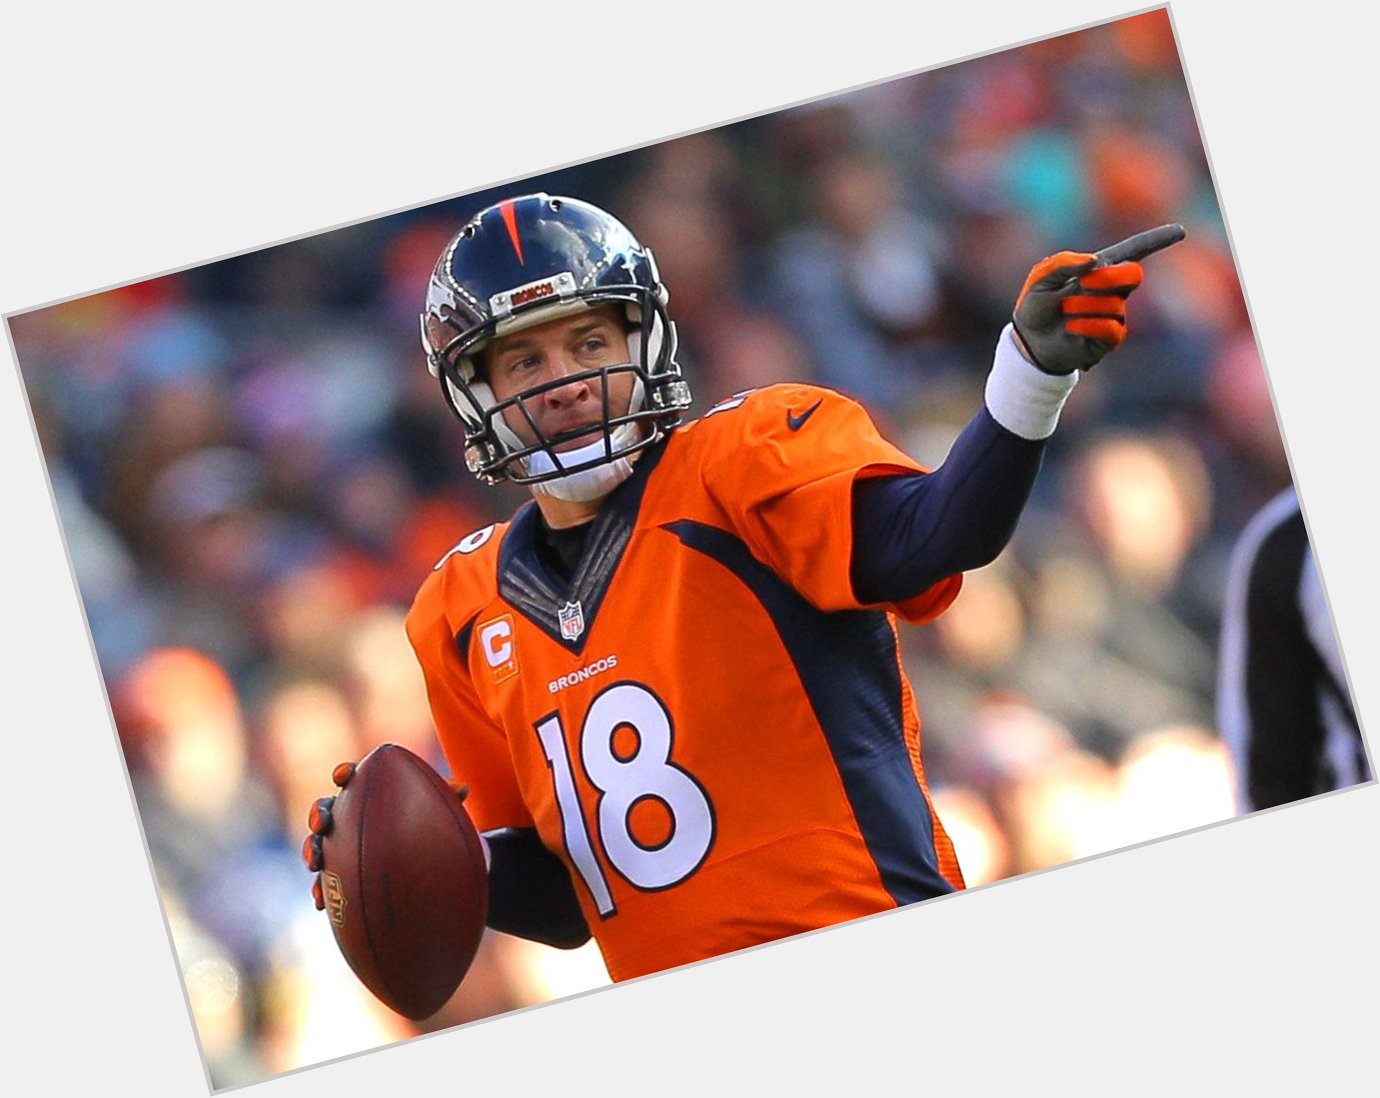 Happy 39th birthday, Peyton Manning. How much longer do you think he will play? Greatest QB ever? 